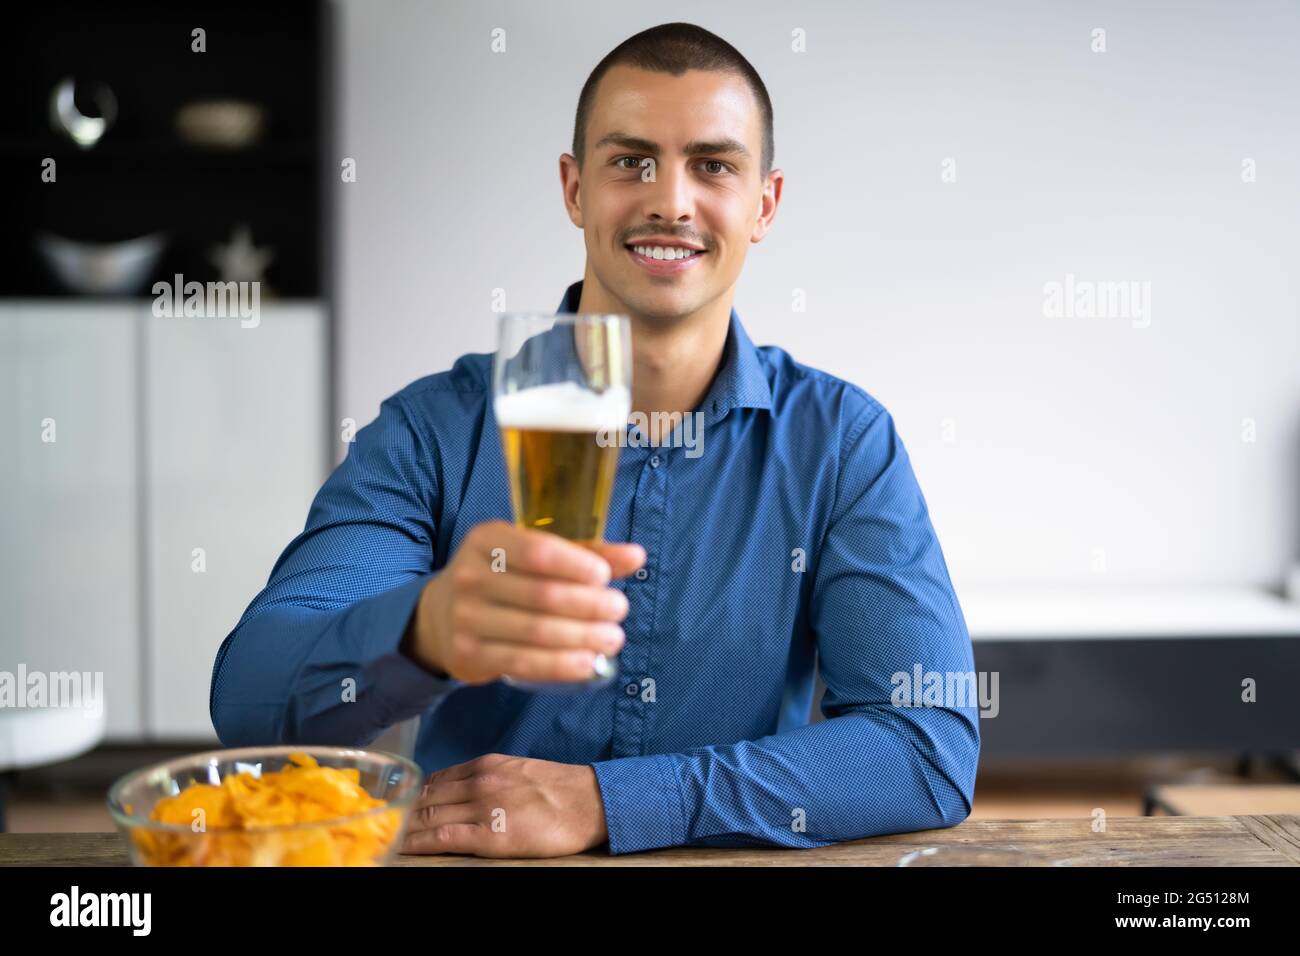 Man Beer Drinking Video Conference Chat In Room Stock Photo